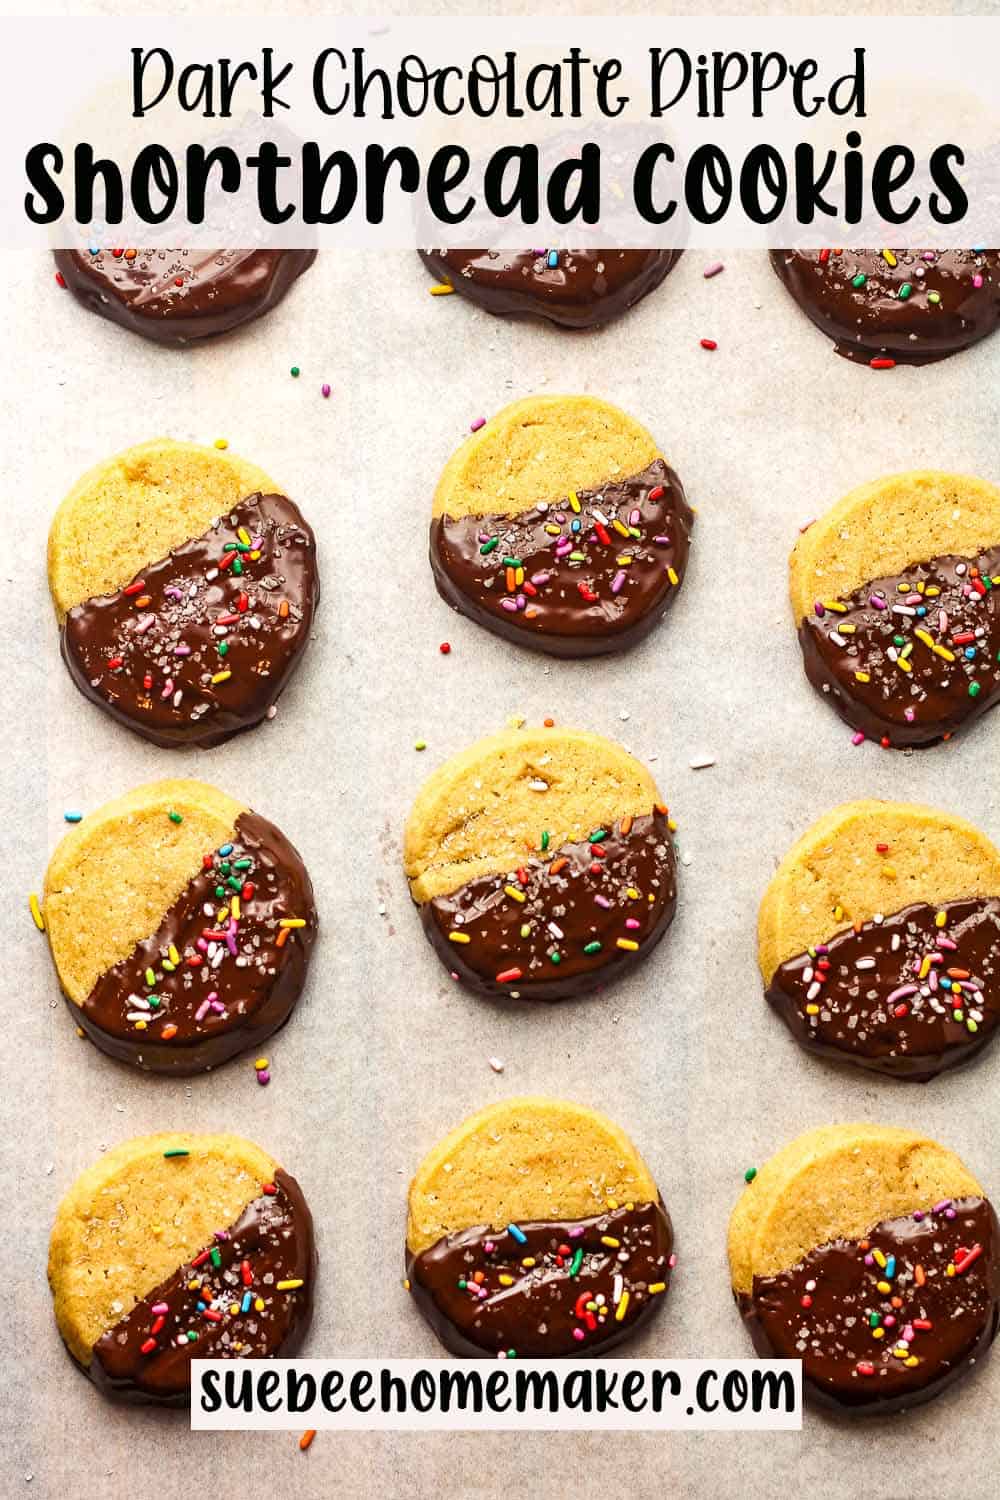 A tray of dark chocolate dipped shortbread cookies with sprinkles.